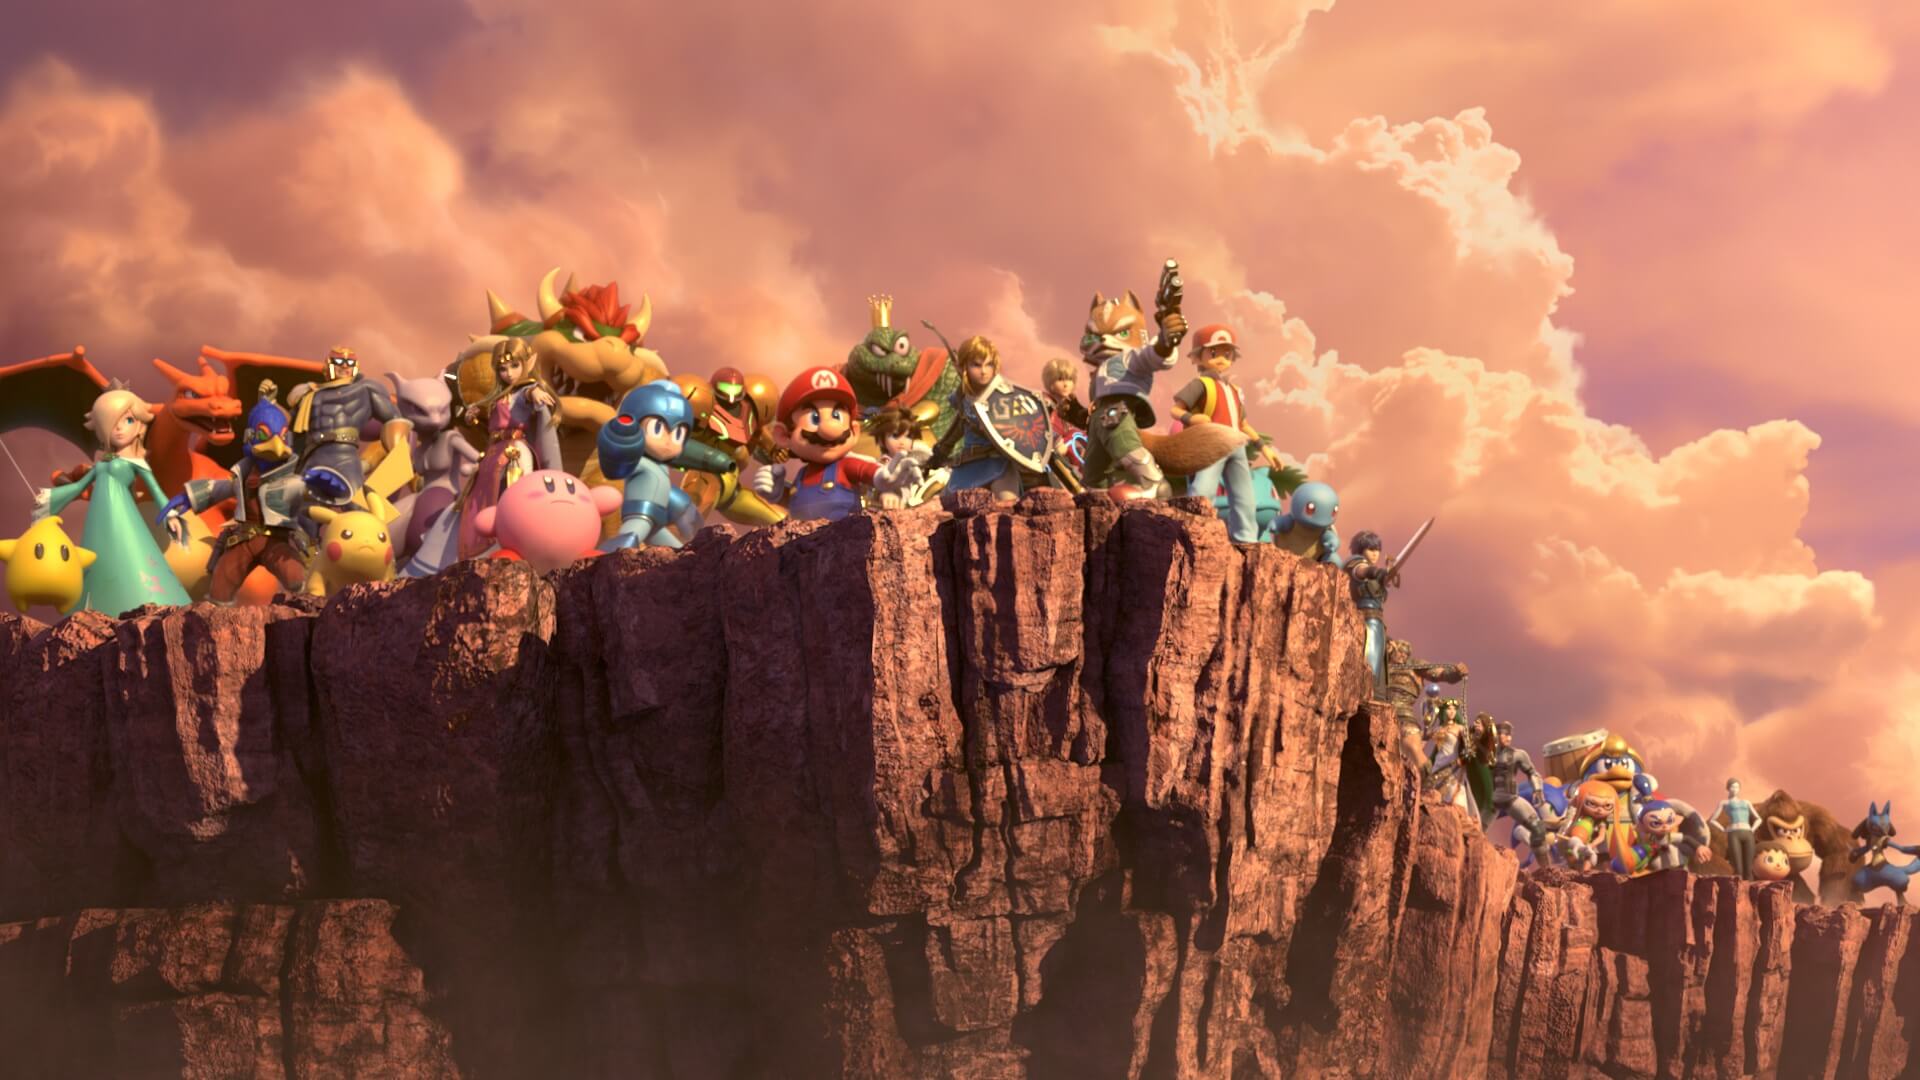 The roster of Nintendo's Super Smash Bros Ultimate, some of the characters of which may appear in future Nintendo Pictures productions